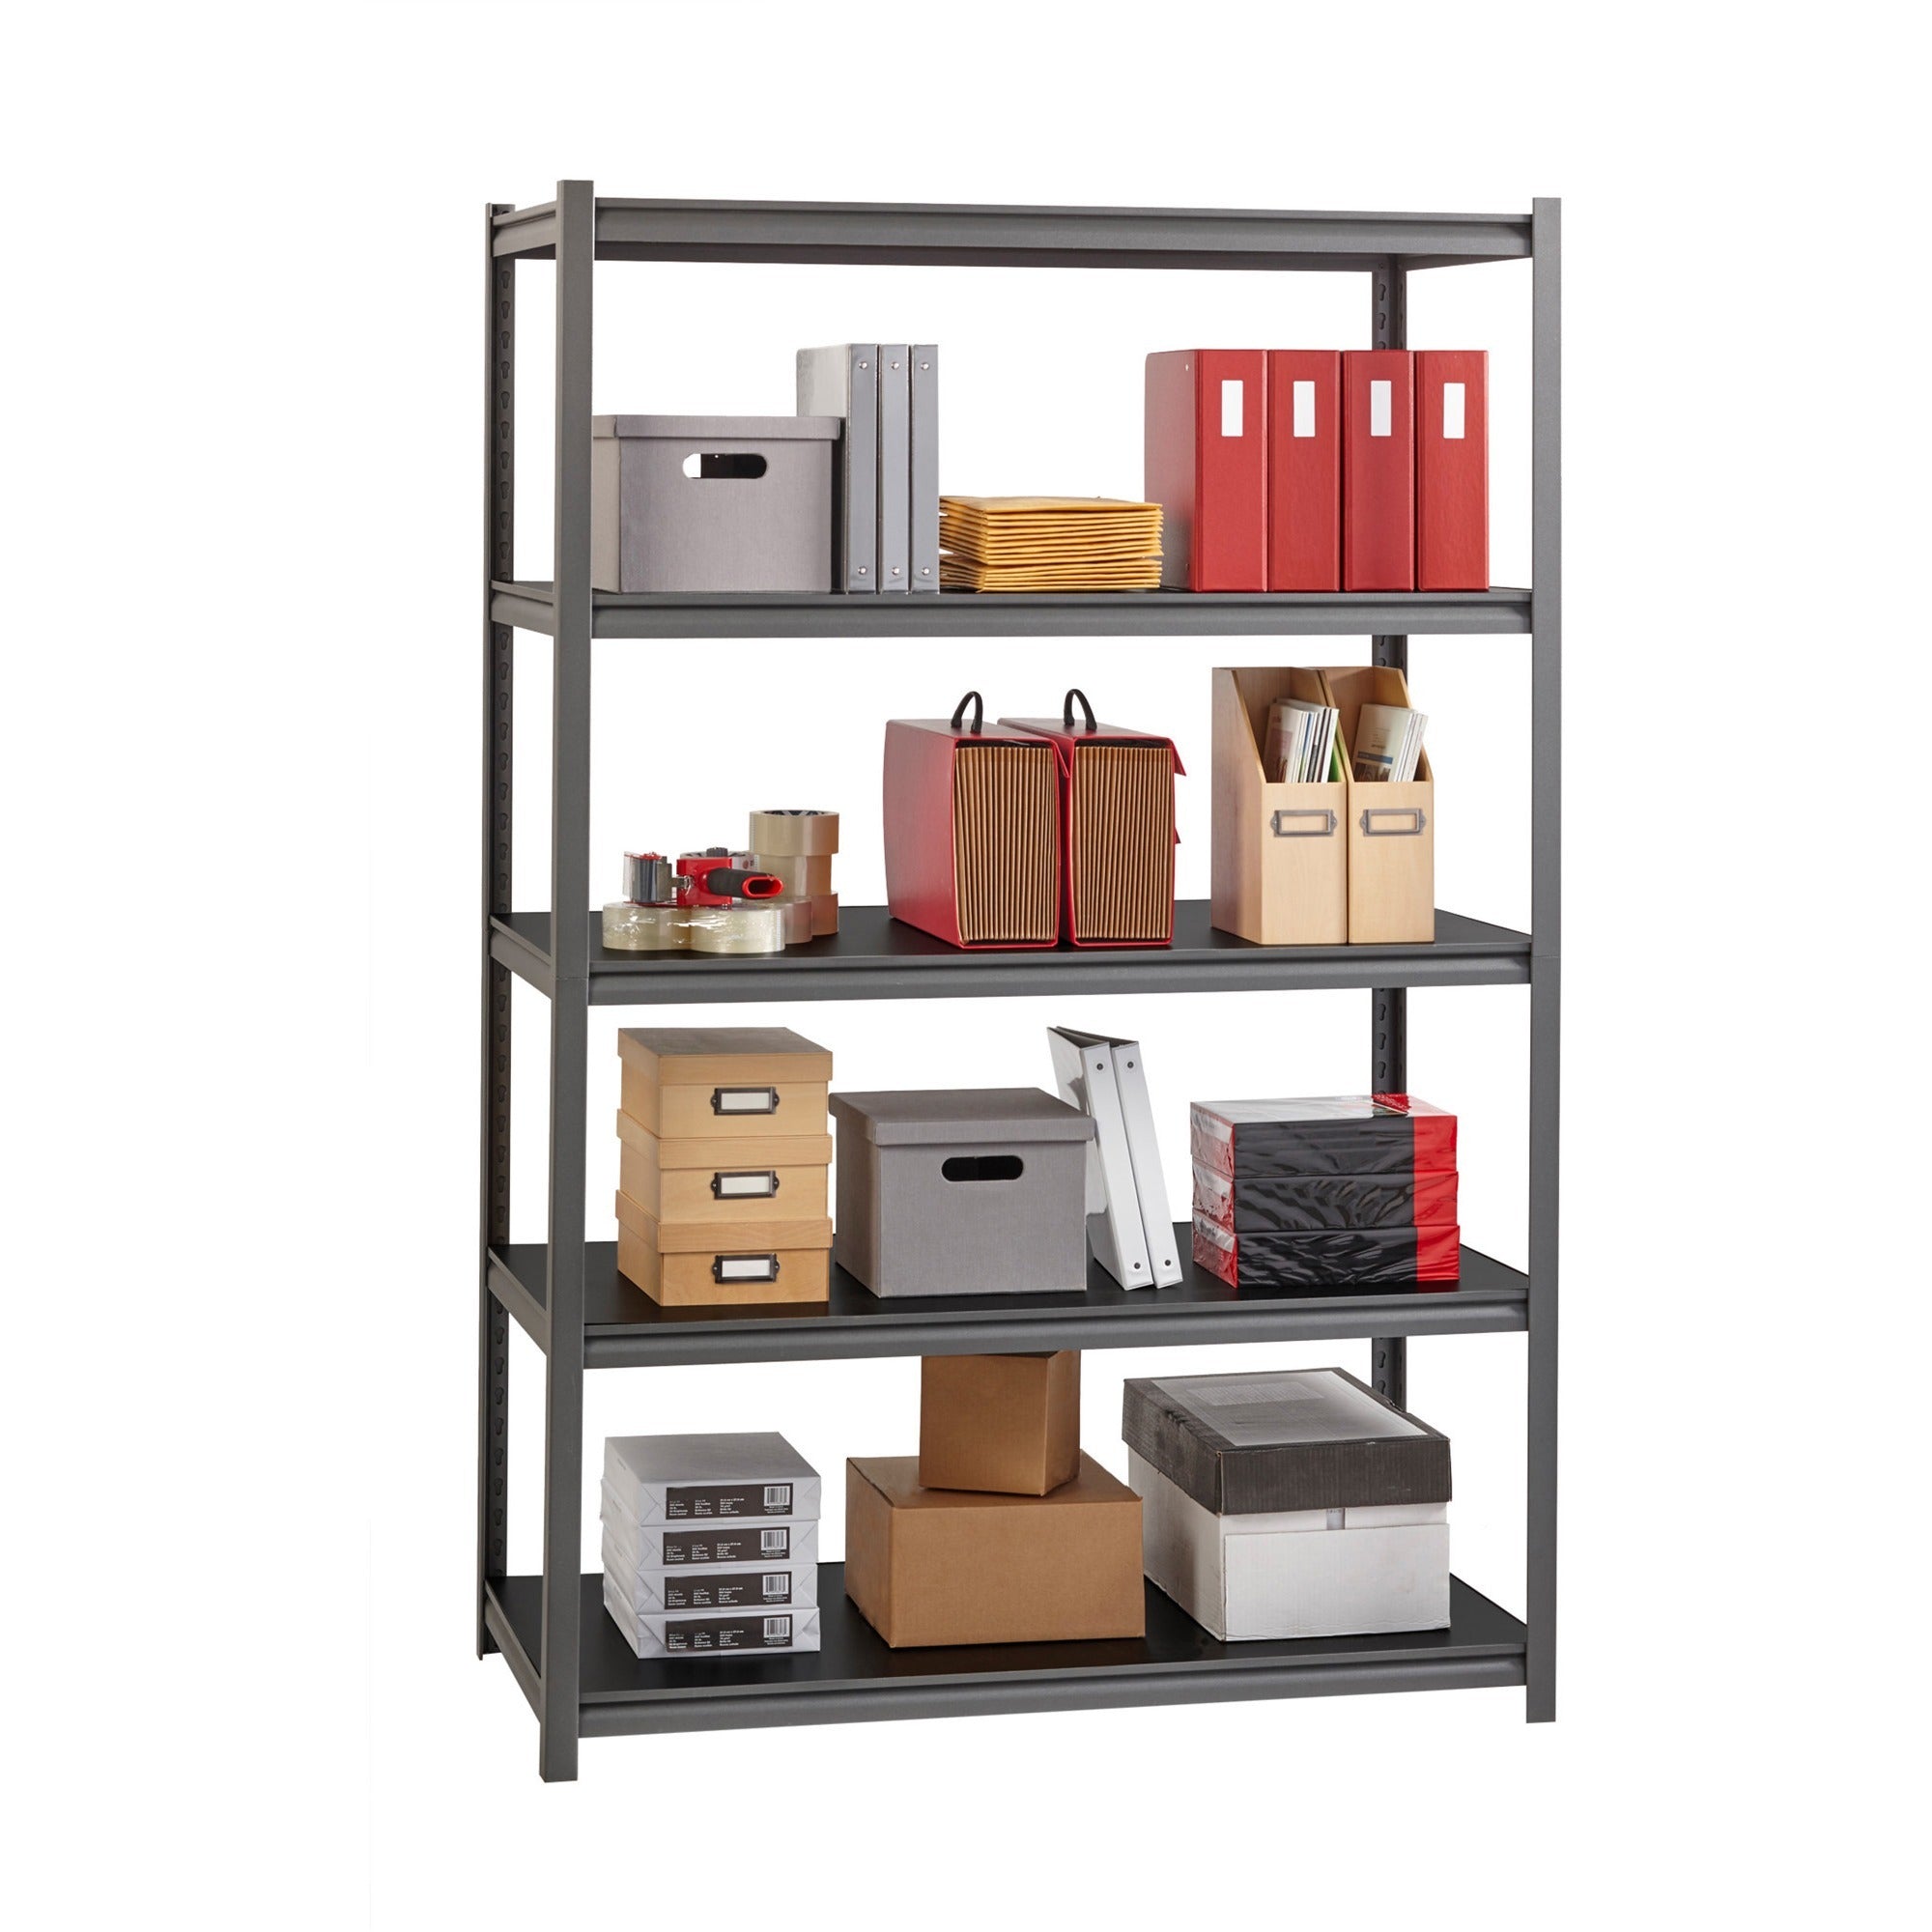 Lorell Iron Horse 3200 lb Capacity Riveted Shelving - 5 Shelf(ves) - 72" Height x 48" Width x 24" Depth - 30% Recycled - Black - Steel, Laminate - 1 Each - 4